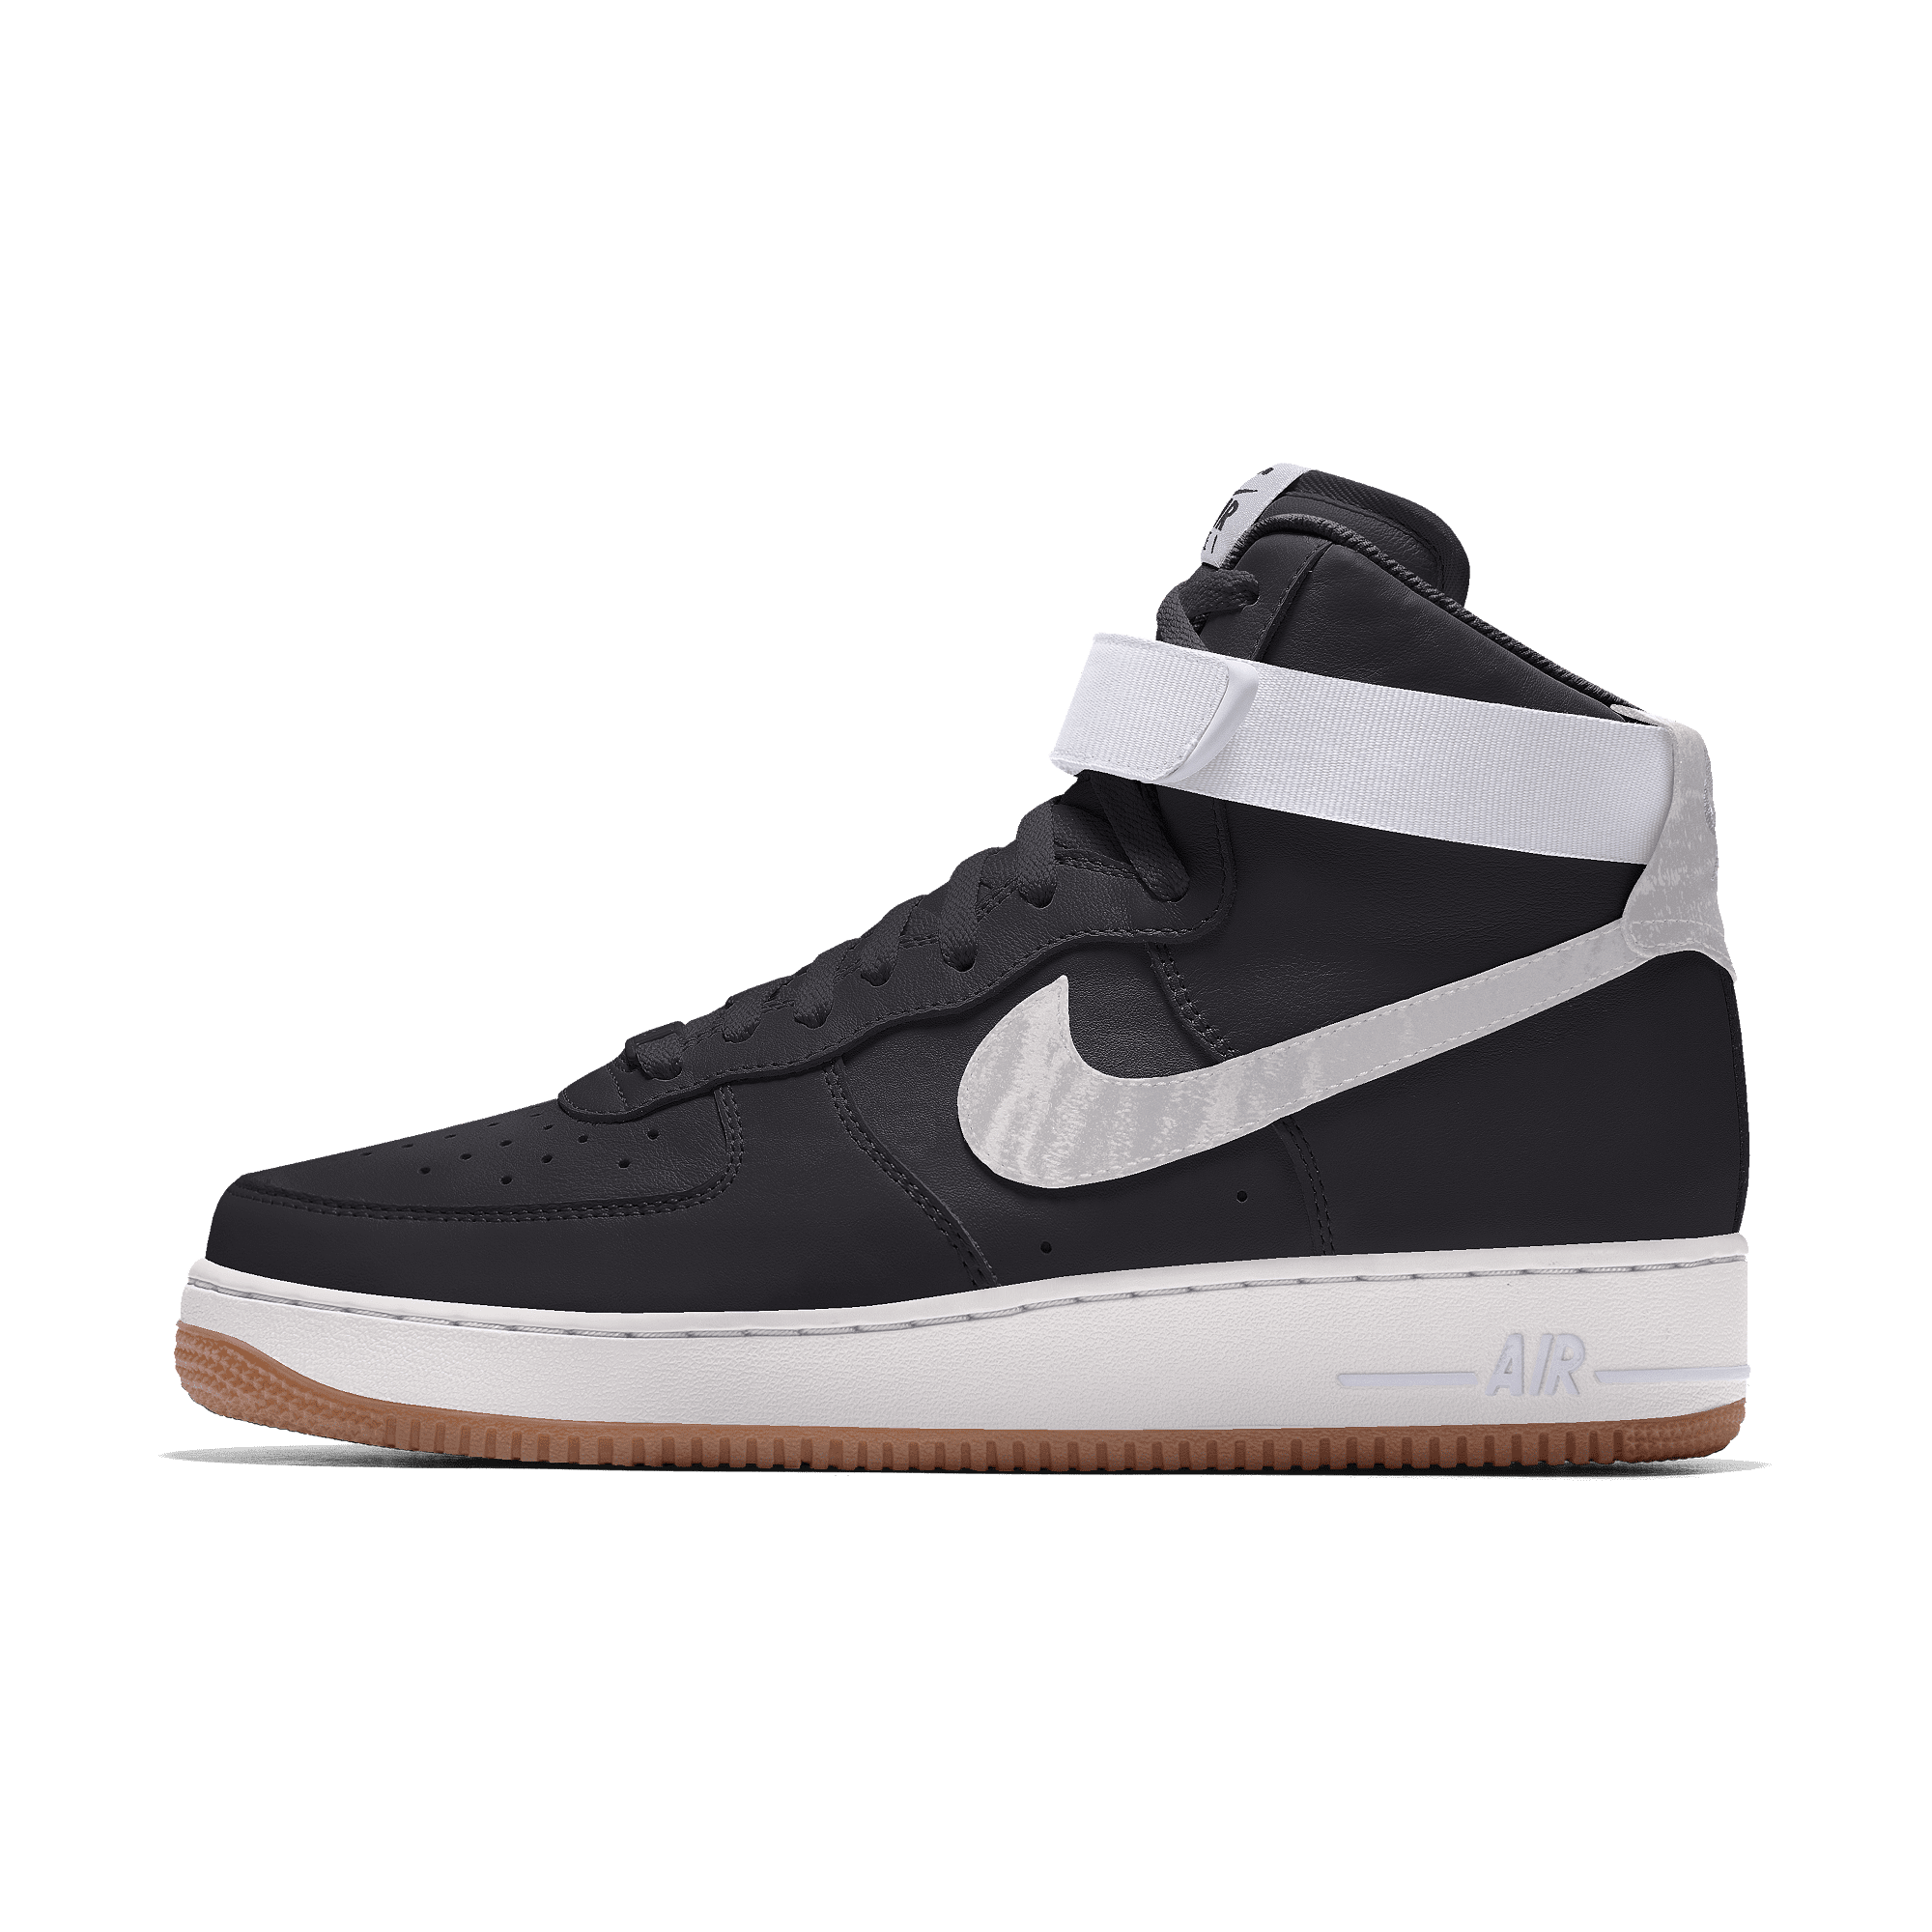 Nike Air Force 1 High By You Zapatillas personalizables - Hombre - Negro